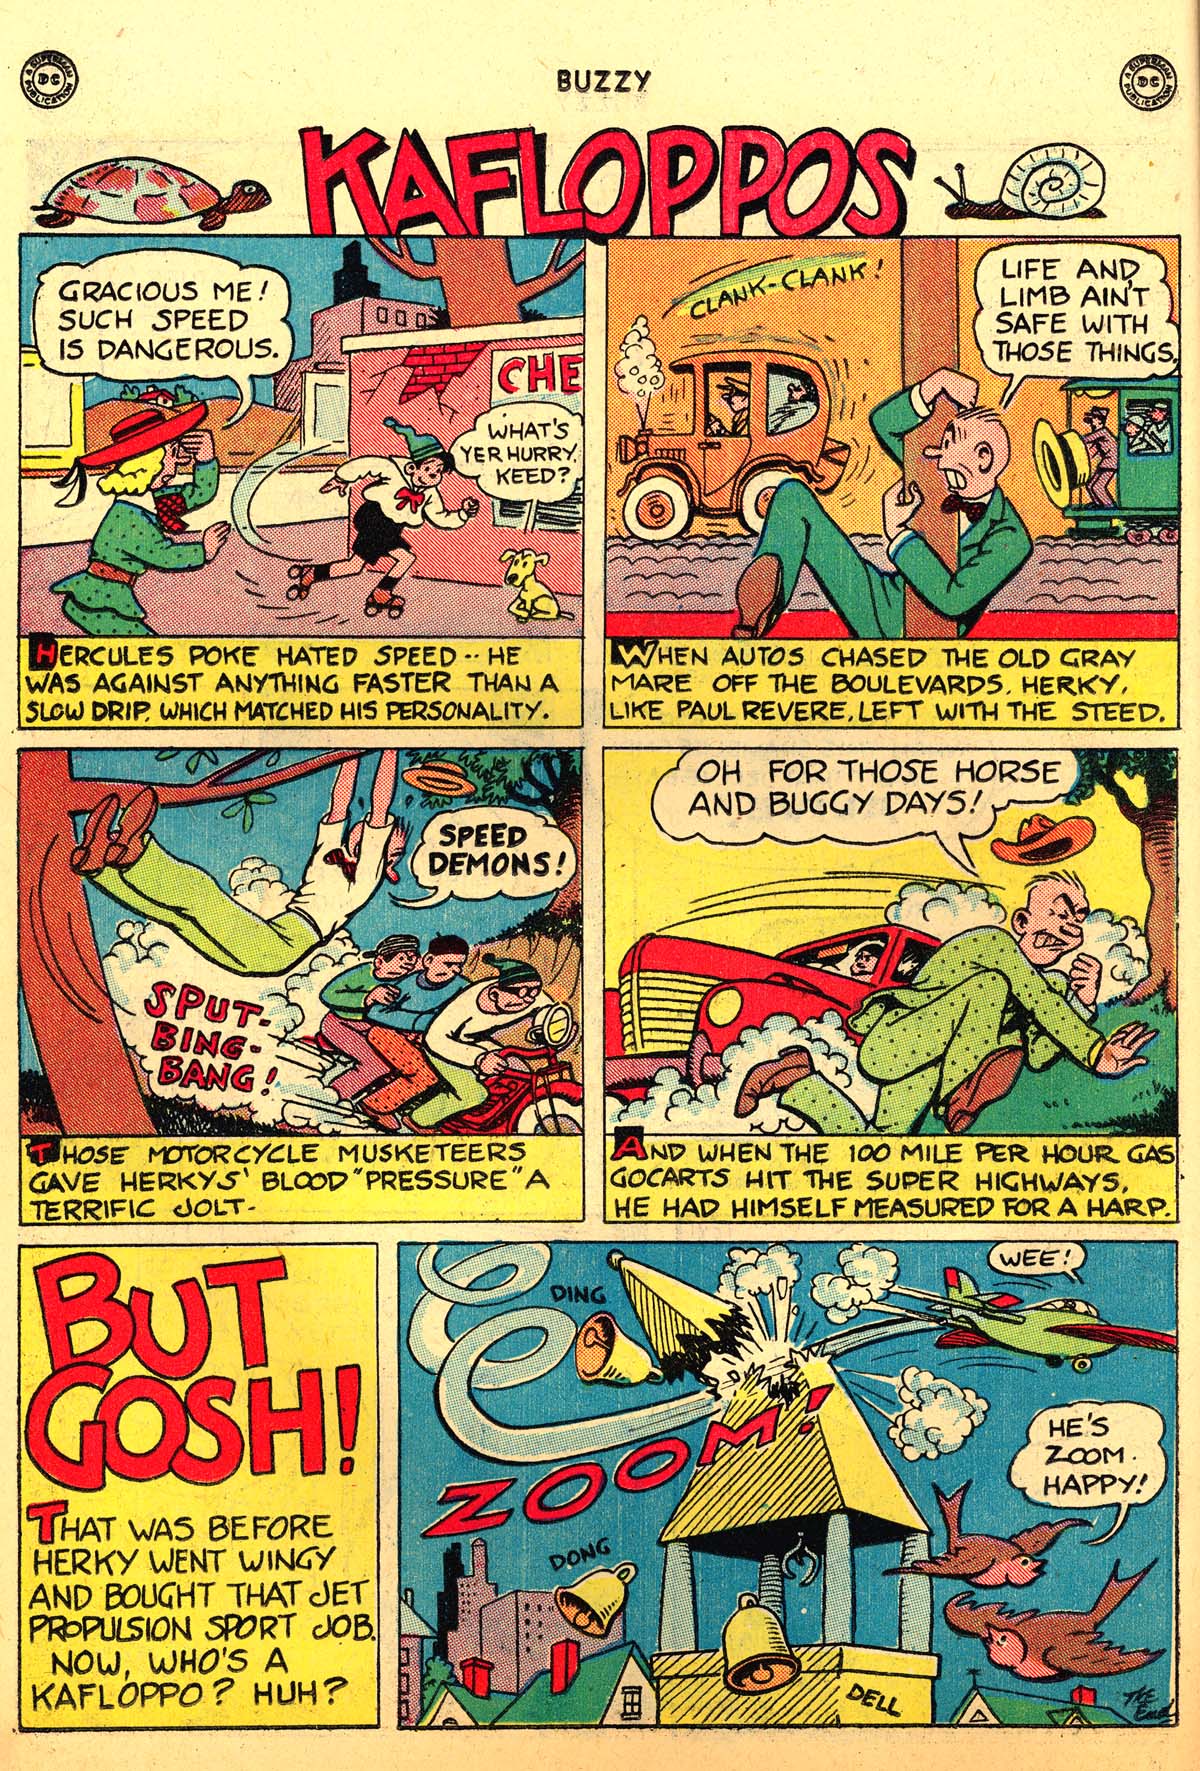 Read online Buzzy comic -  Issue #9 - 20